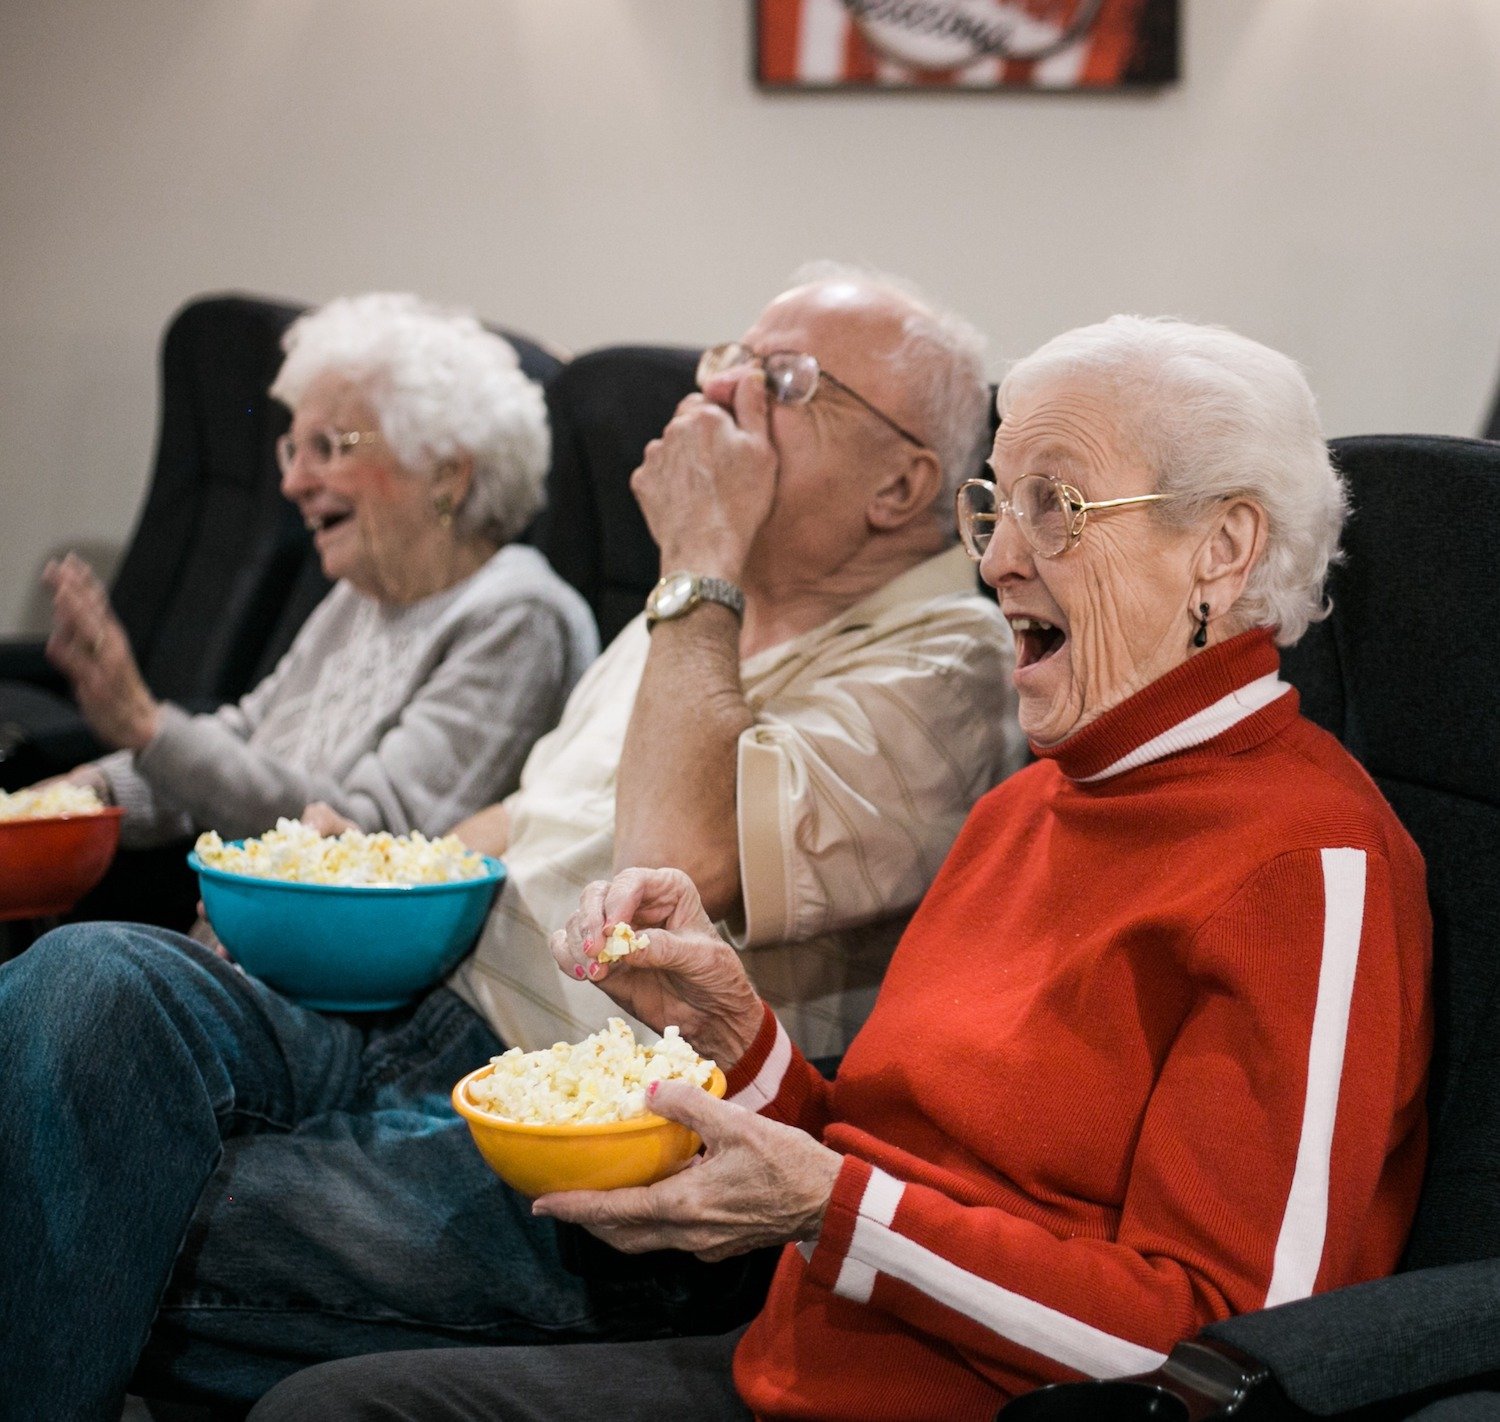 Group of seniors watching a movie and eating popcorn